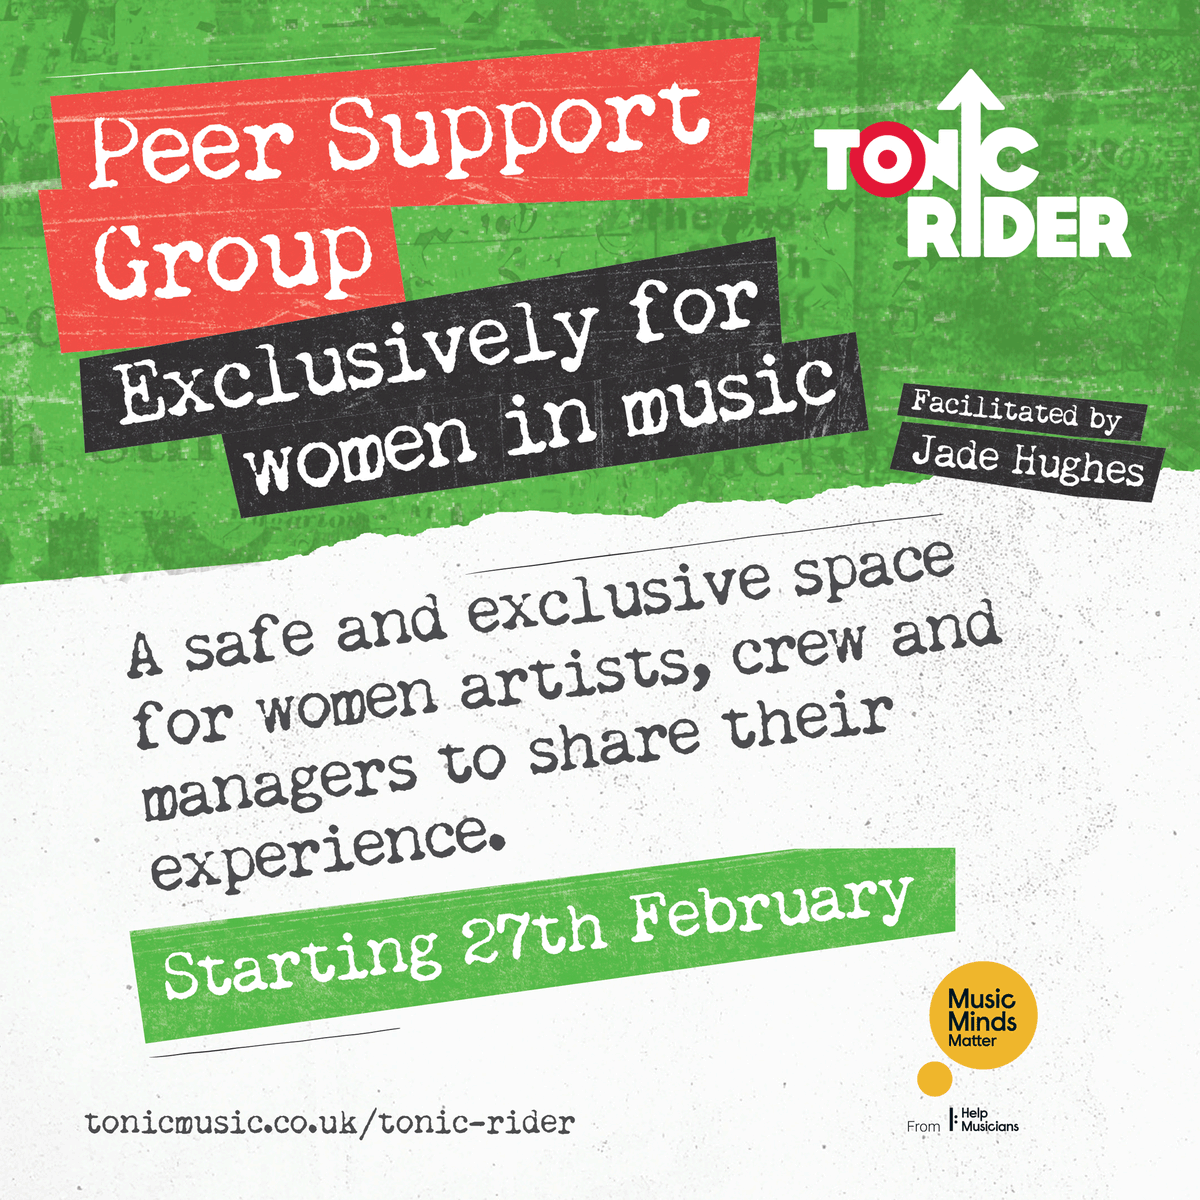 Starting Tuesday 27 February, a six-week online Peer Support Group exclusively for women in music. Funded by @HelpMusicians. More → tonicmusic.co.uk/post/psg24w #TonicRider #MusicMindsMatter #MentalHealth #Wellbeing #Music